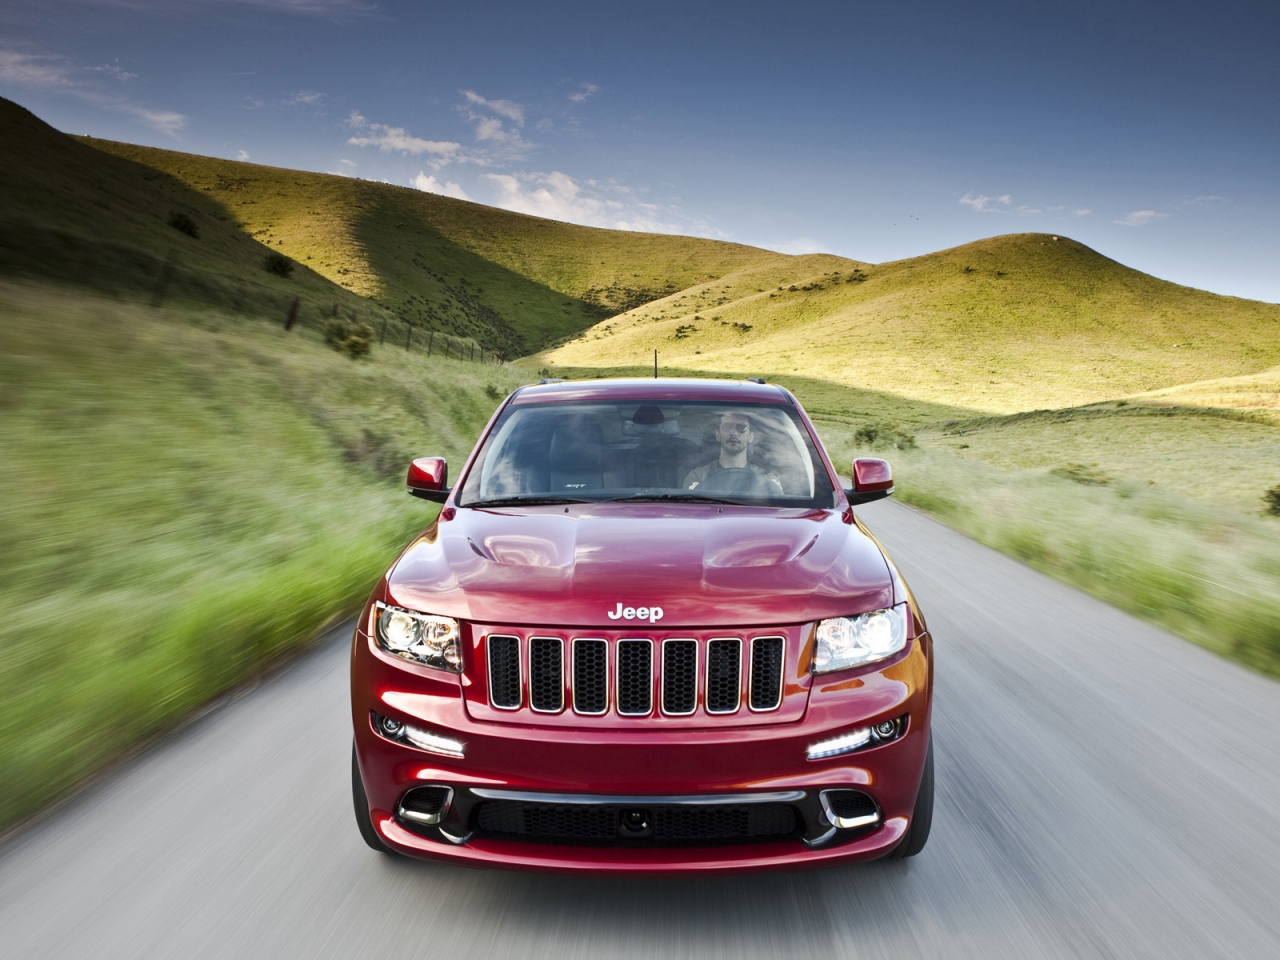 Jeep Grand Cherokee SRT8 2012 for 1280 x 960 resolution